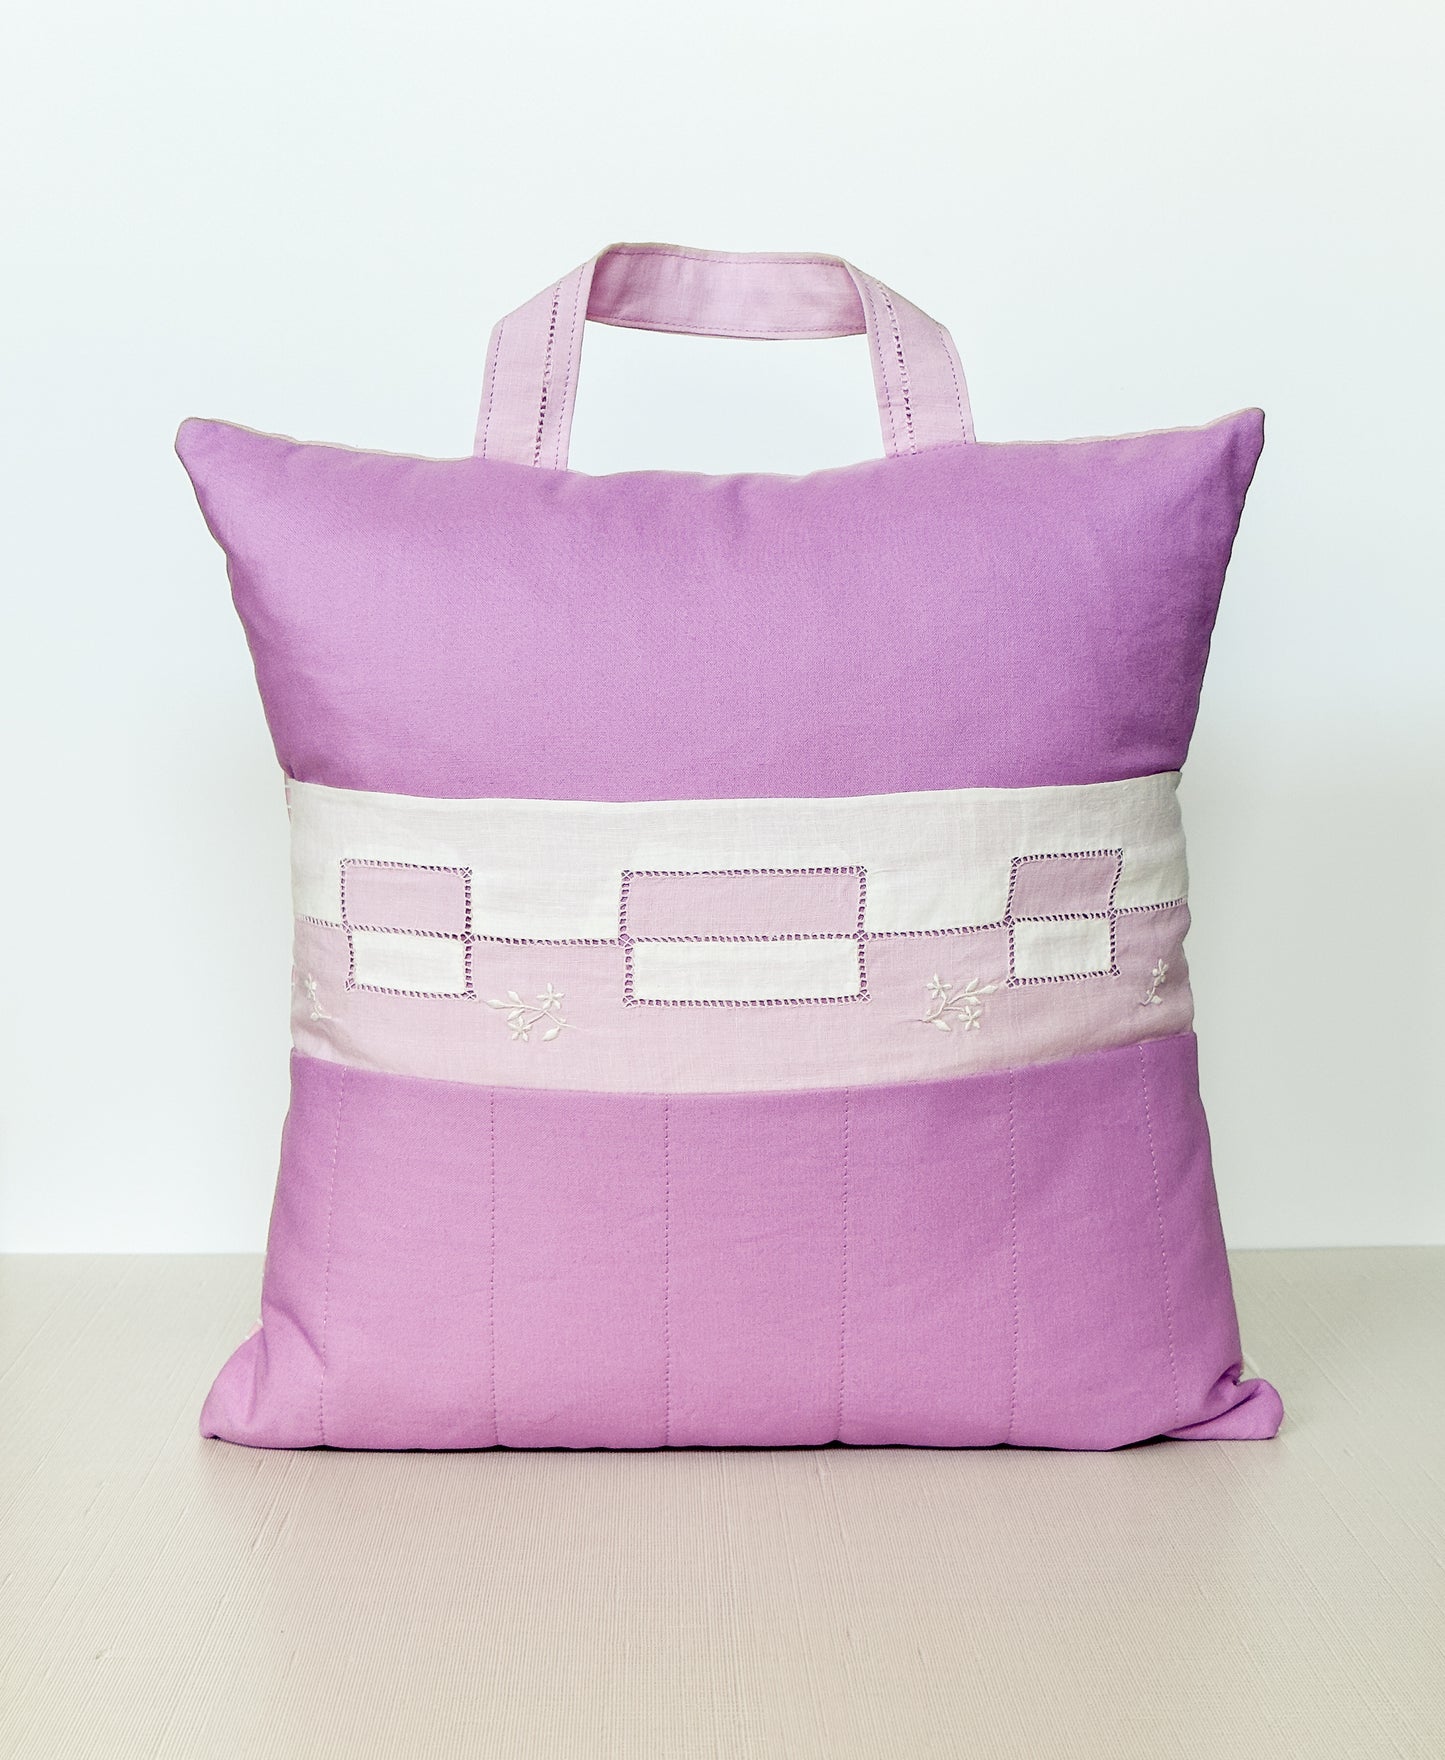 Vintage Pillow in Pink & White with Pocket & Carry Handle